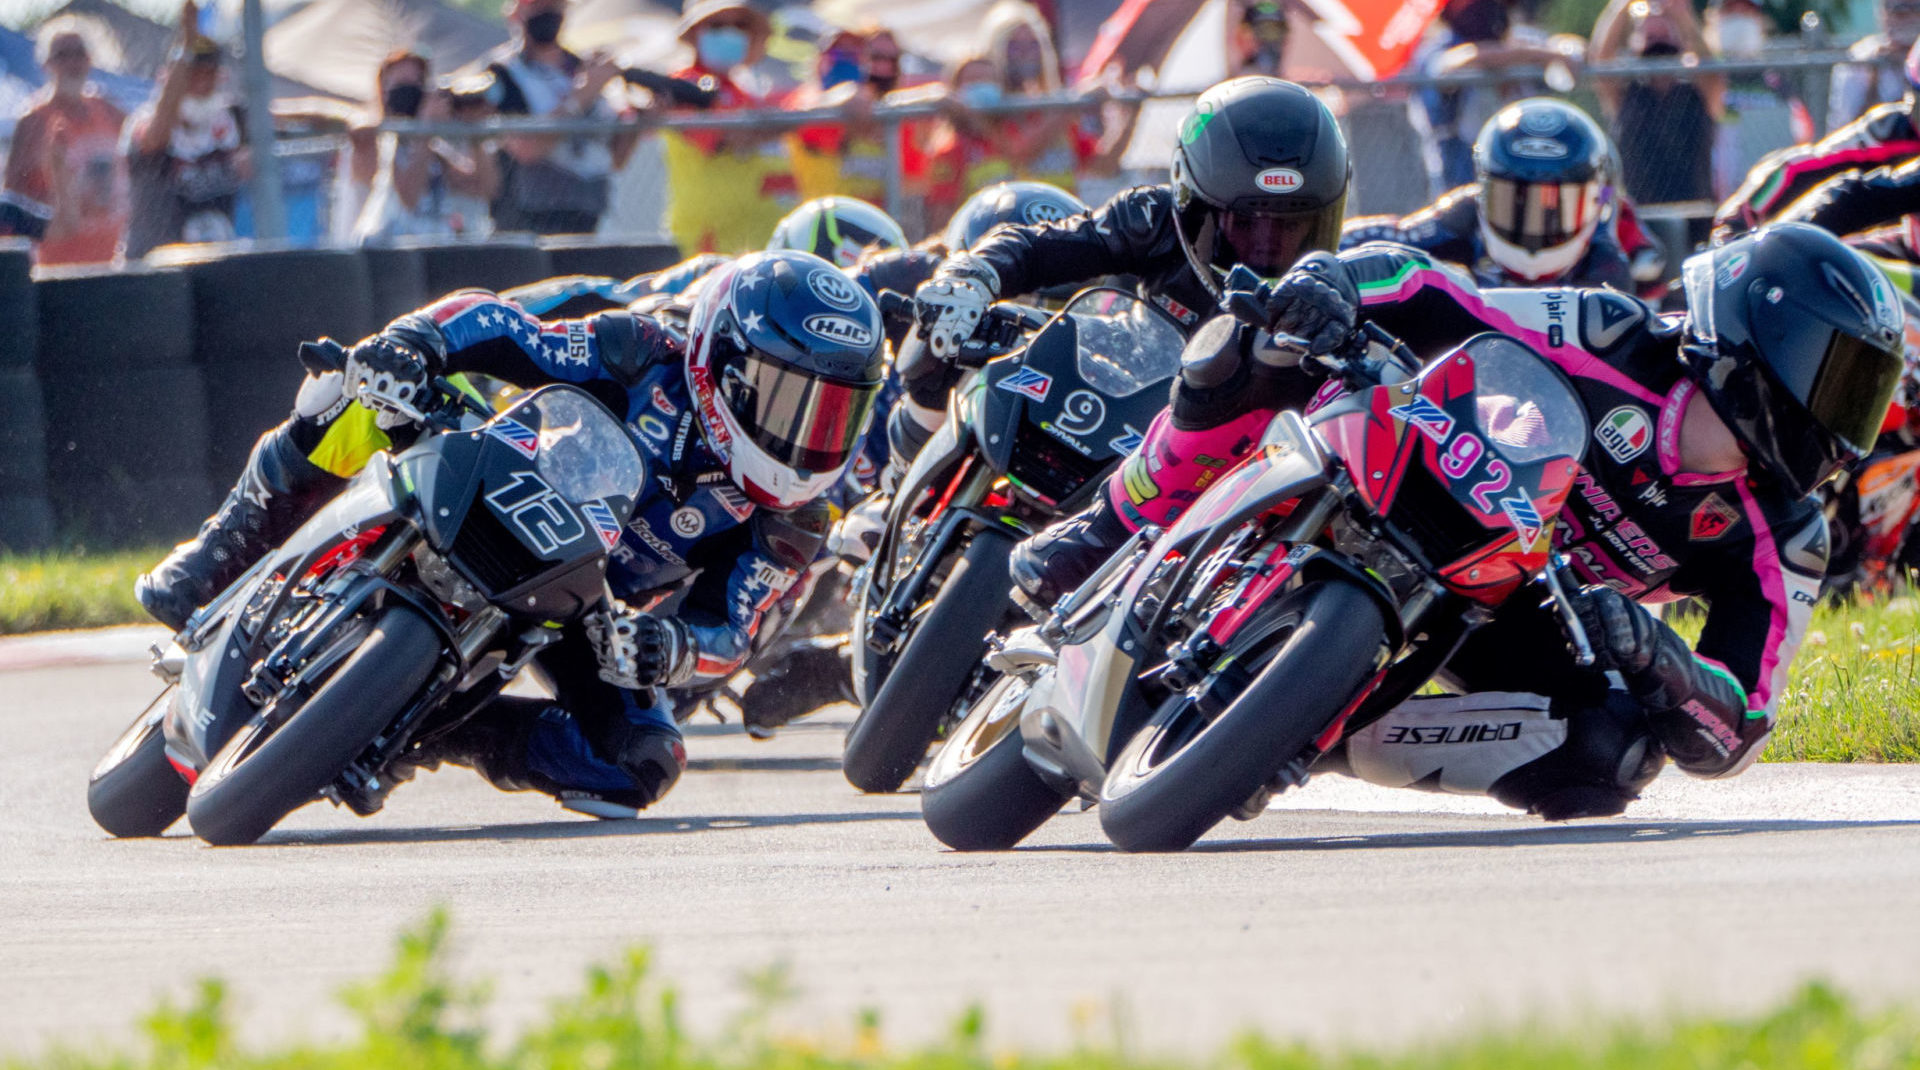 Rossi Moor (92) leads Travis Horn (12) and Jesse James Shedden (9) during a MotoAmerica Mini Cup by Motul race in 2020. Photo courtesy Dorna.